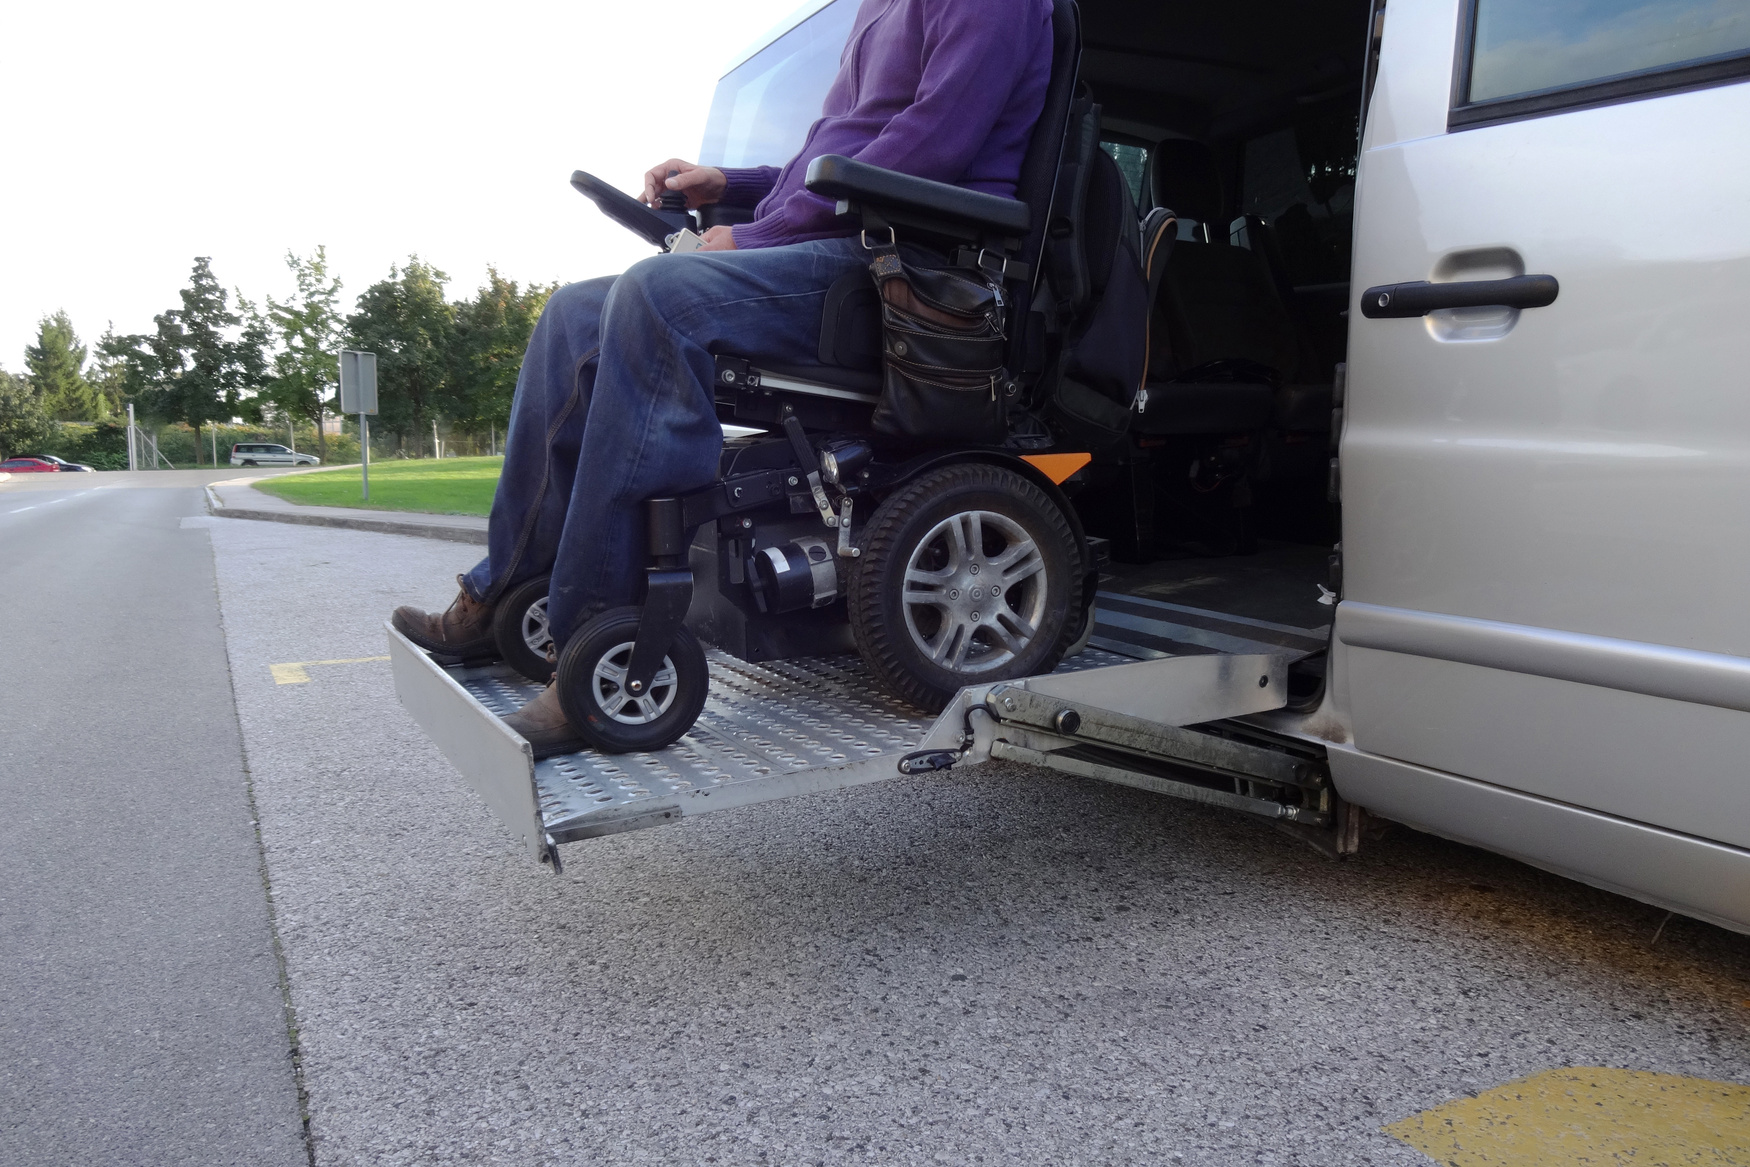 Disabled Man on Wheelchair using vehicle